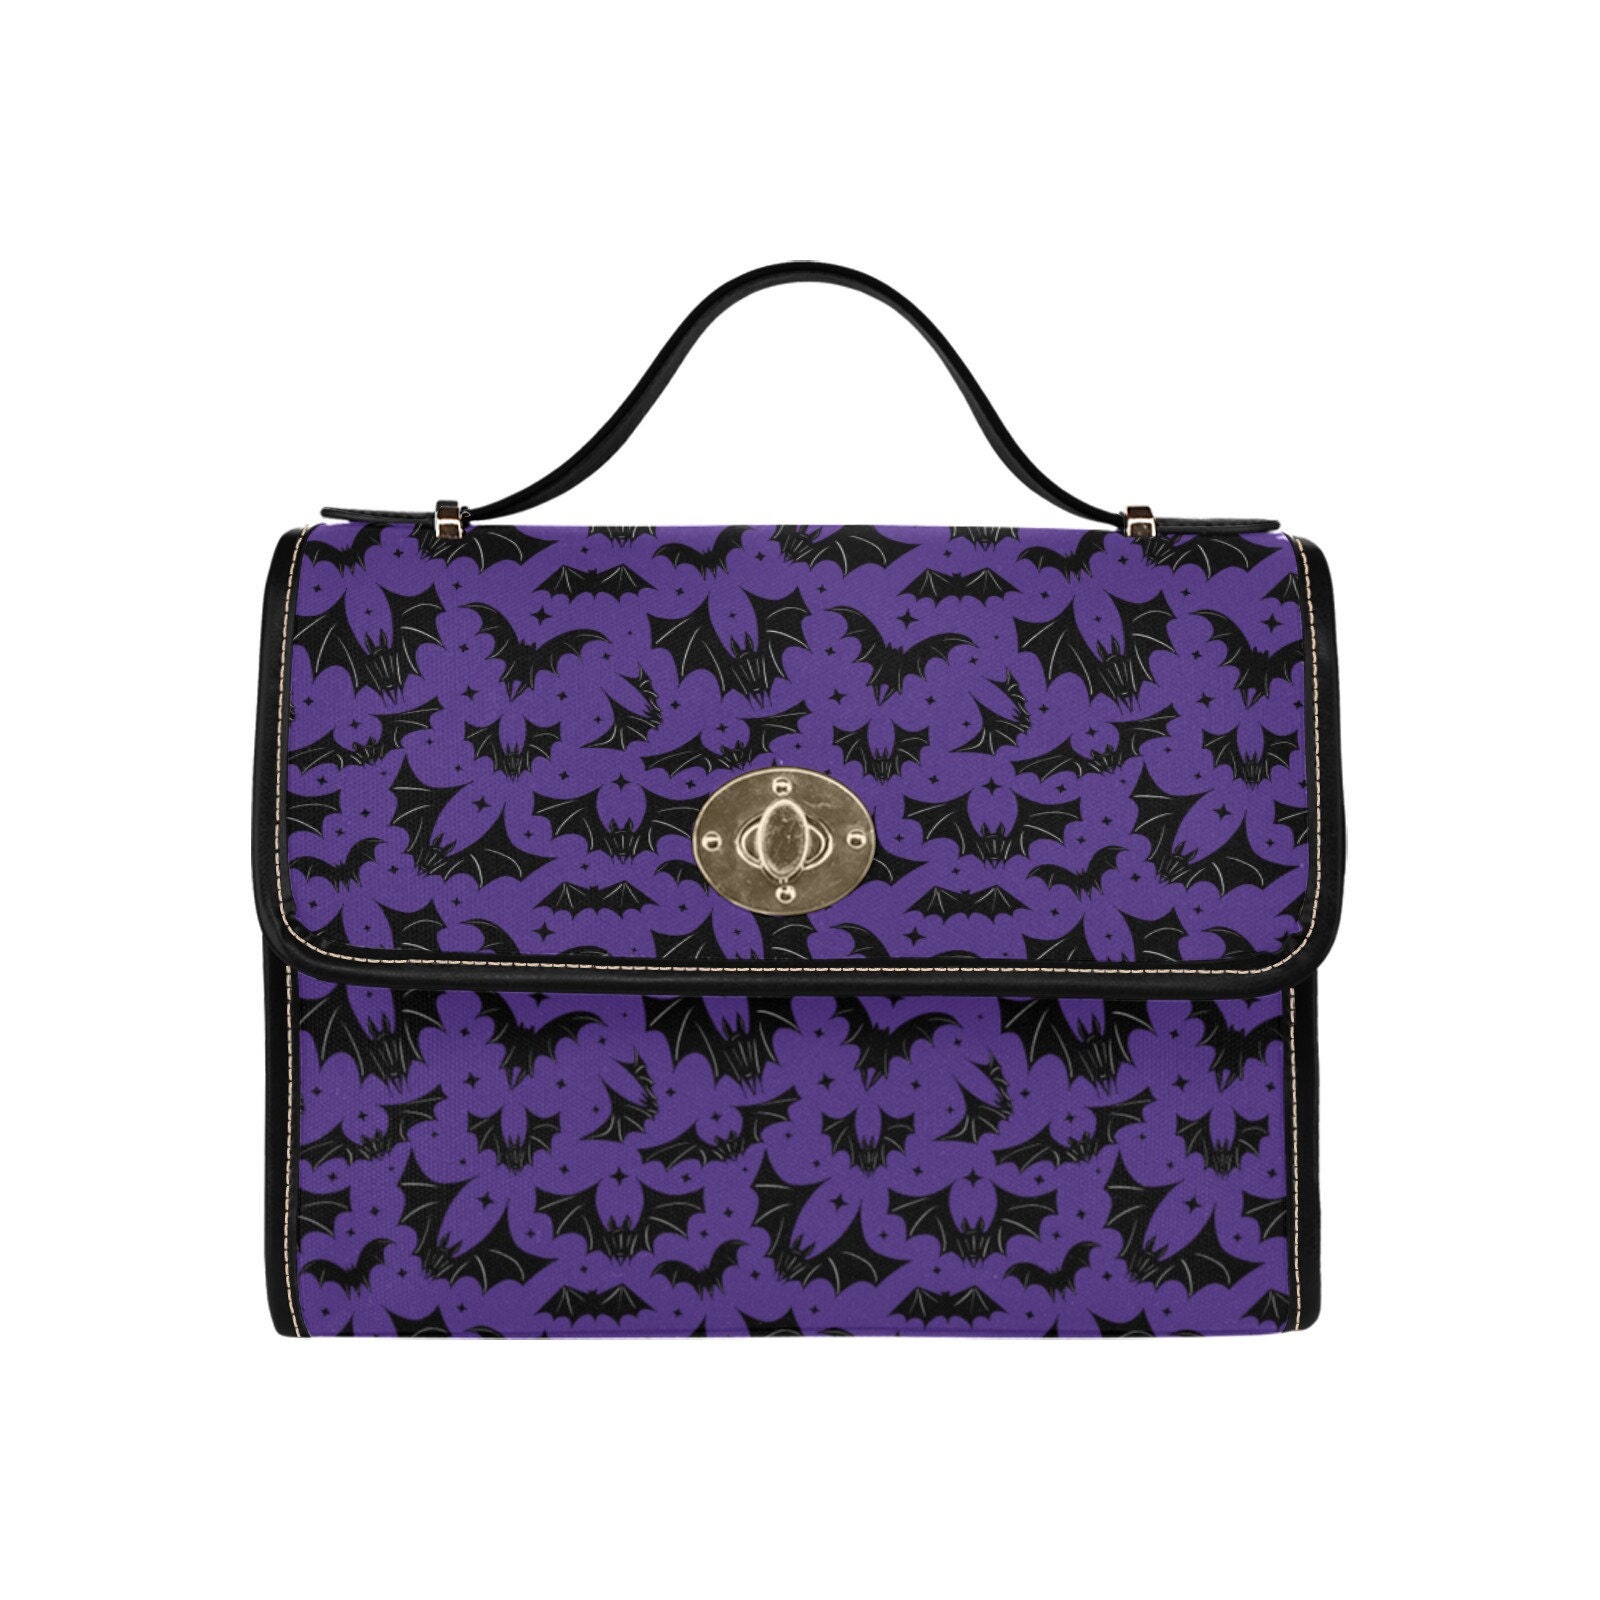 Cute Not Spooky Bat Embroidered Purse, Earbud or Hair Accessory Pouch,  Purple